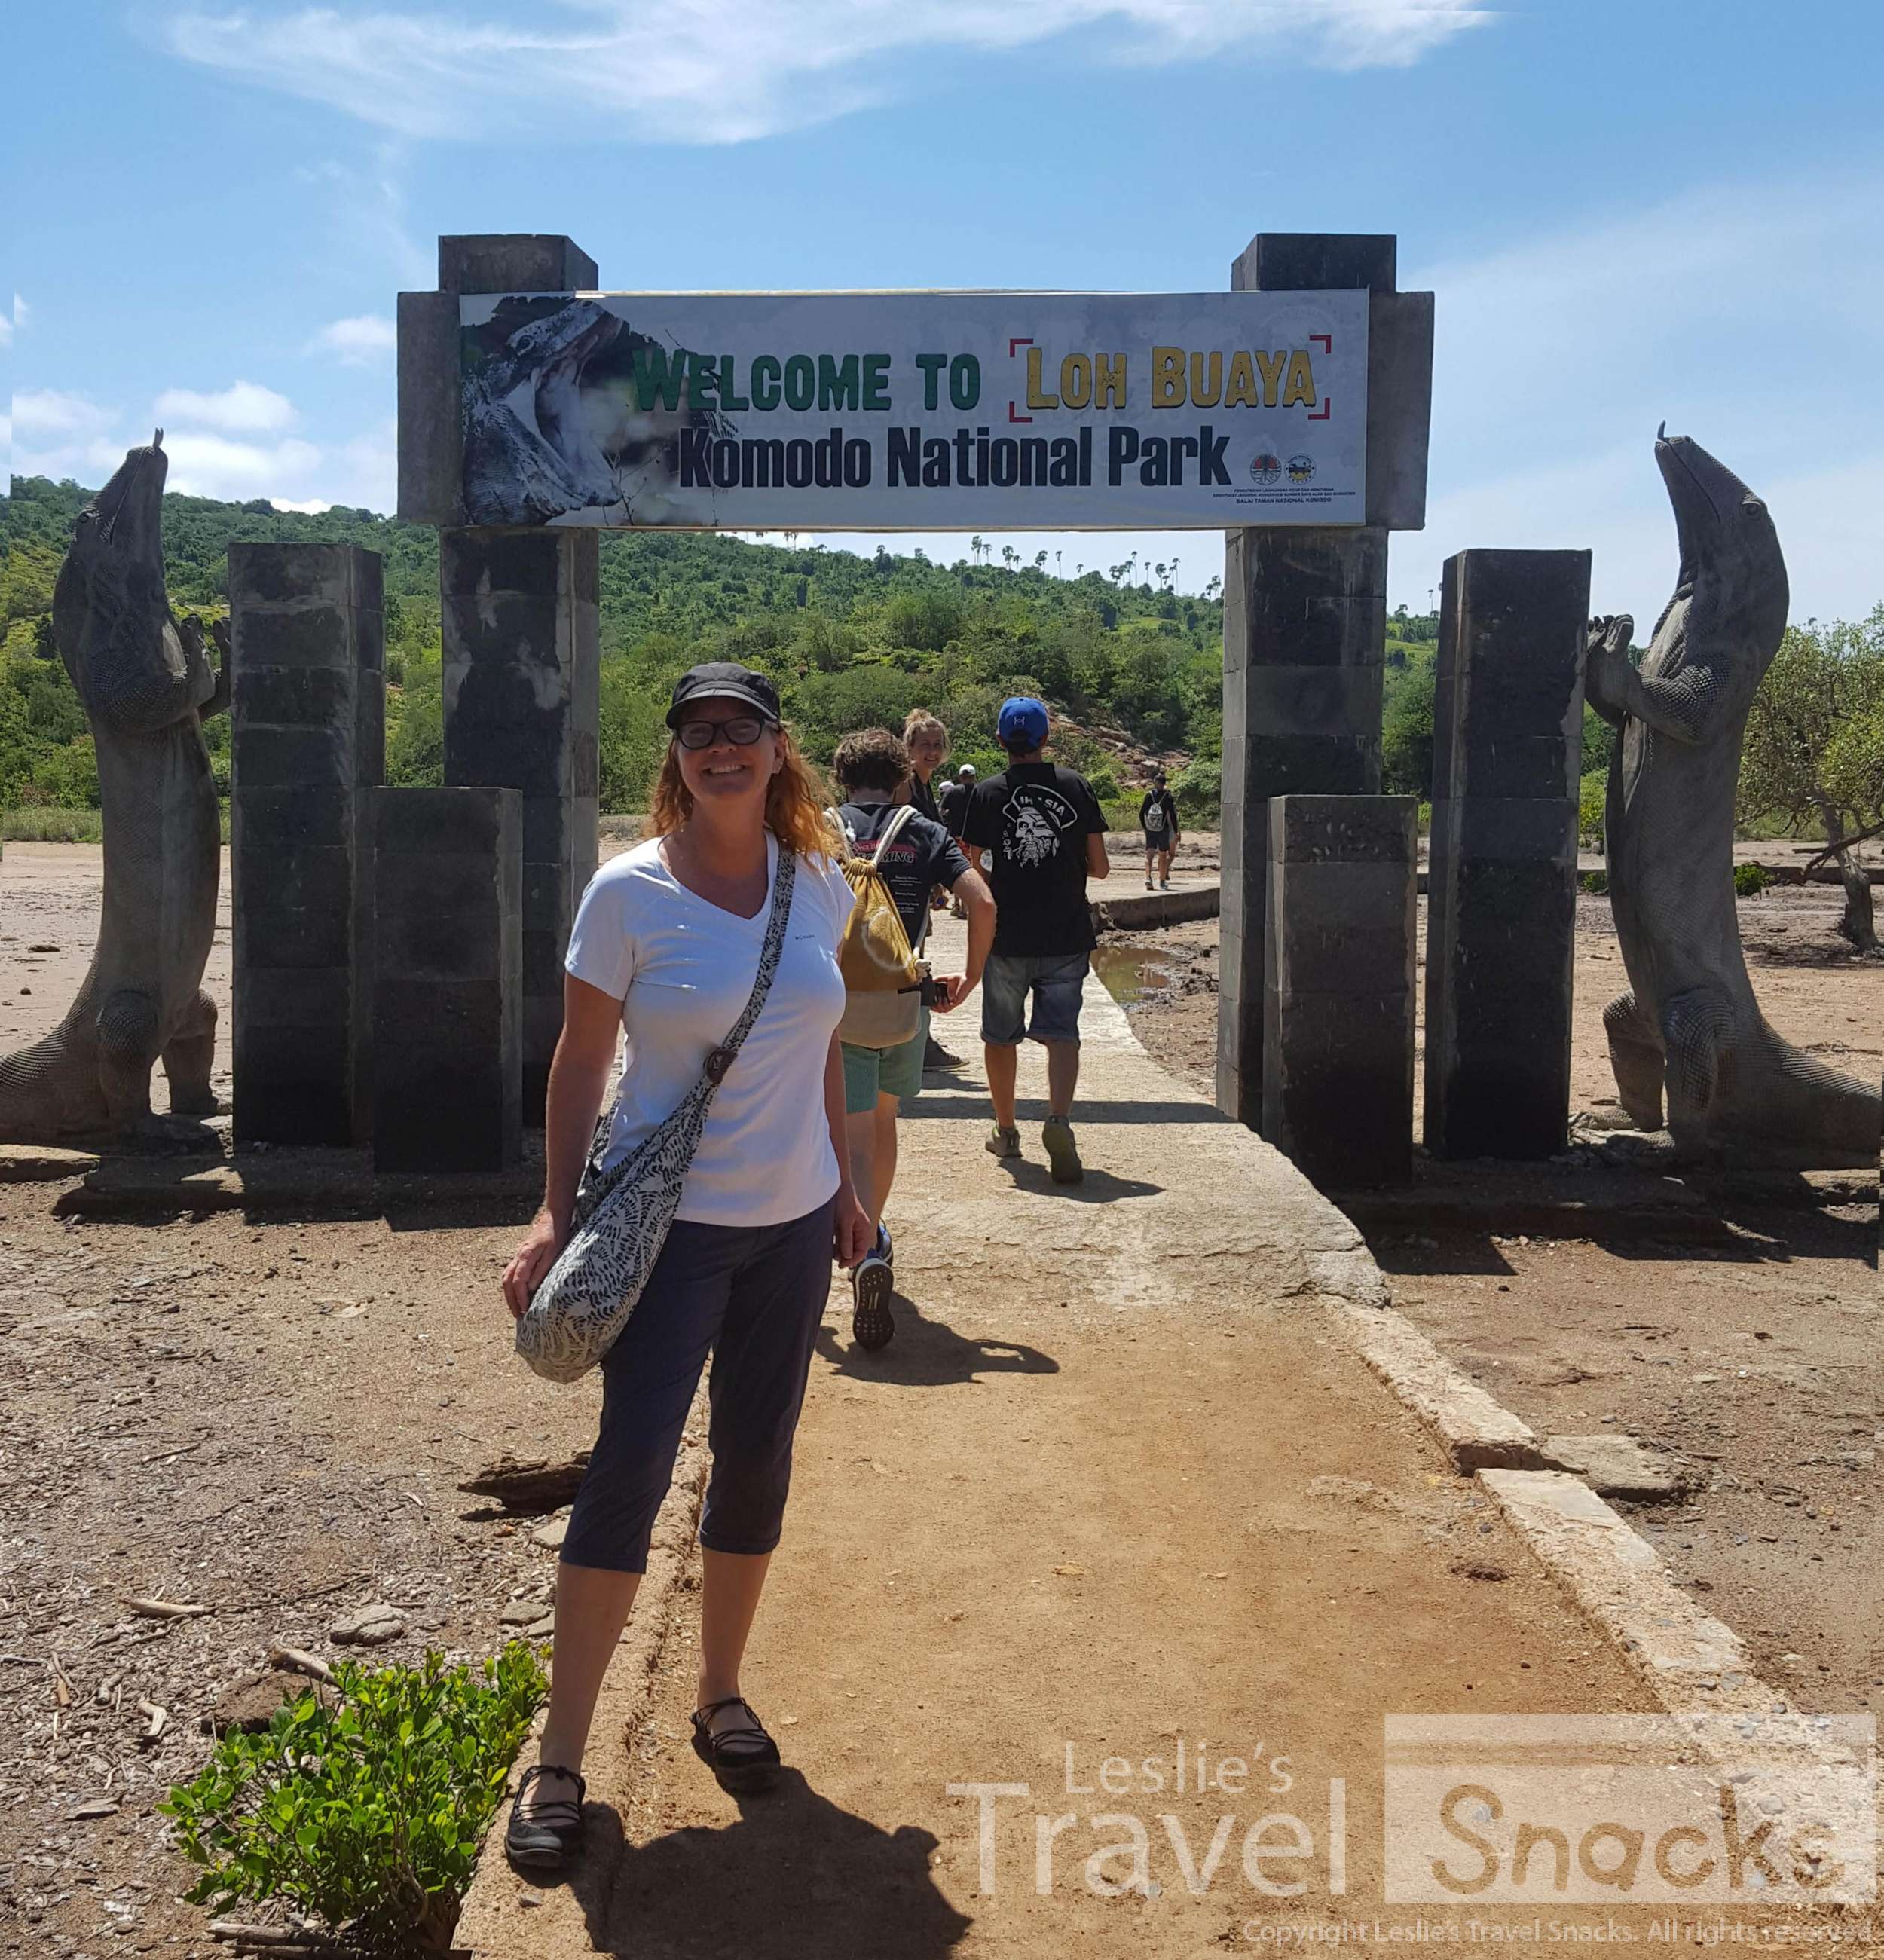 Walking through Rinca and Komodo was very hot, but the paths were flat and easy.